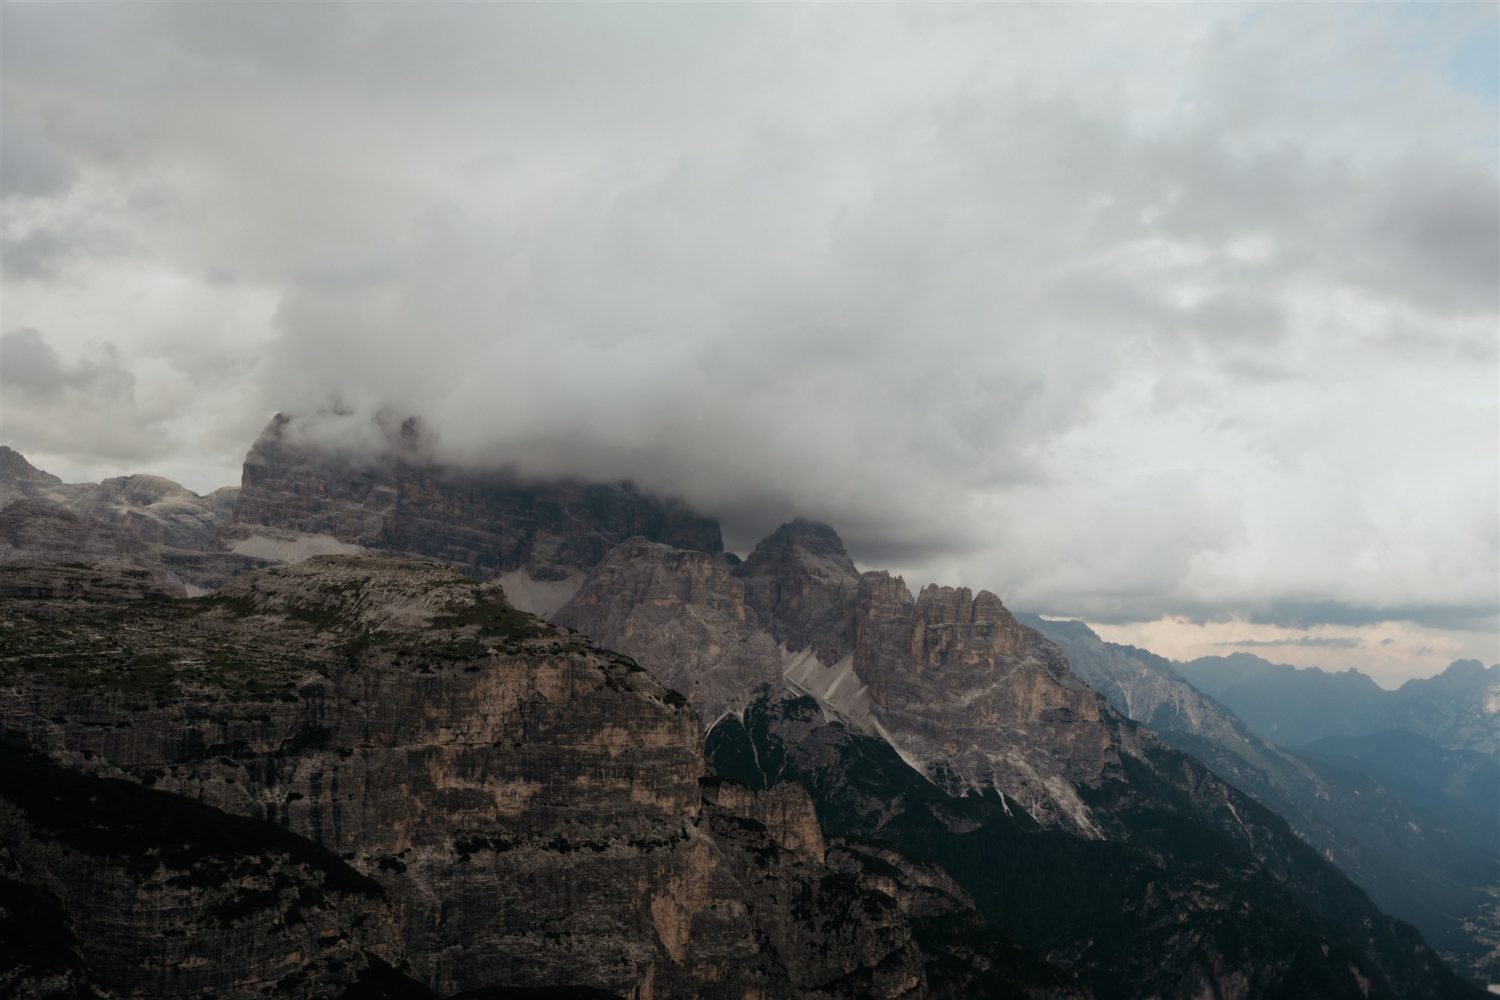 Dolomites covered by clouds in Italy captured by destination wedding photographer